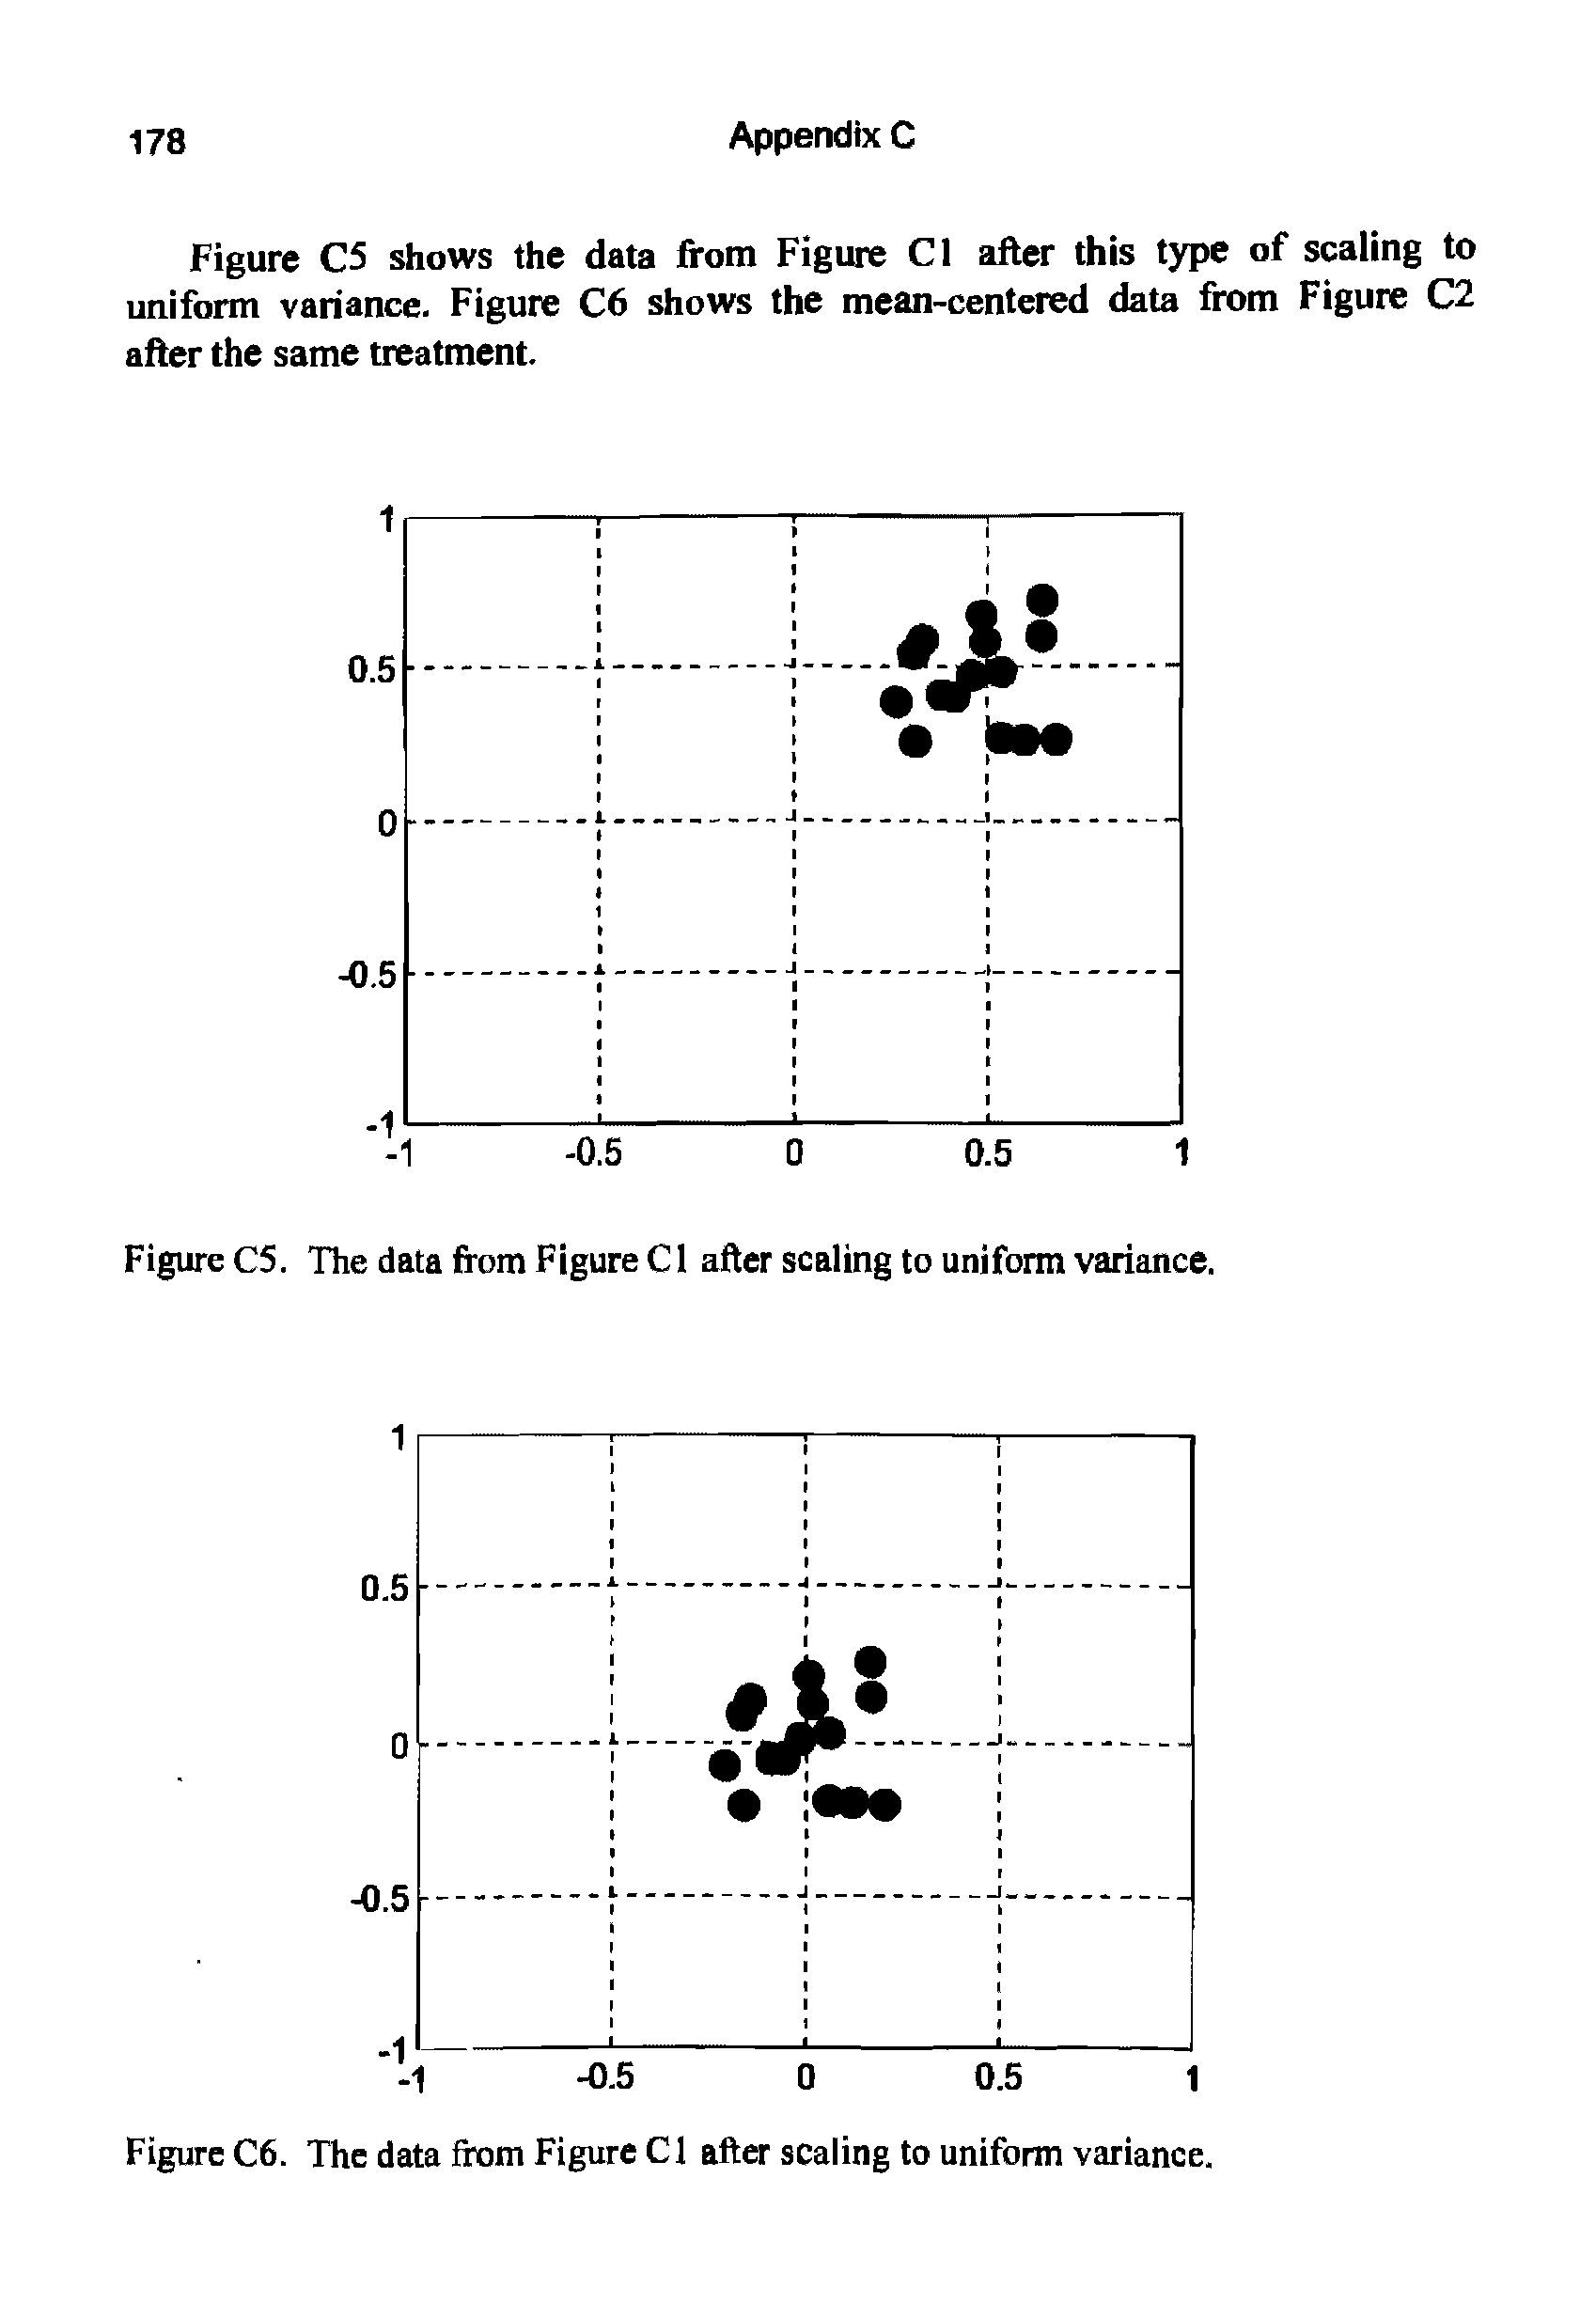 Figure C5 shows the data from Figure Cl after this type of scaling to uniform variance. Figure C6 shows the mean-centered data from Figure C2 after the same treatment.